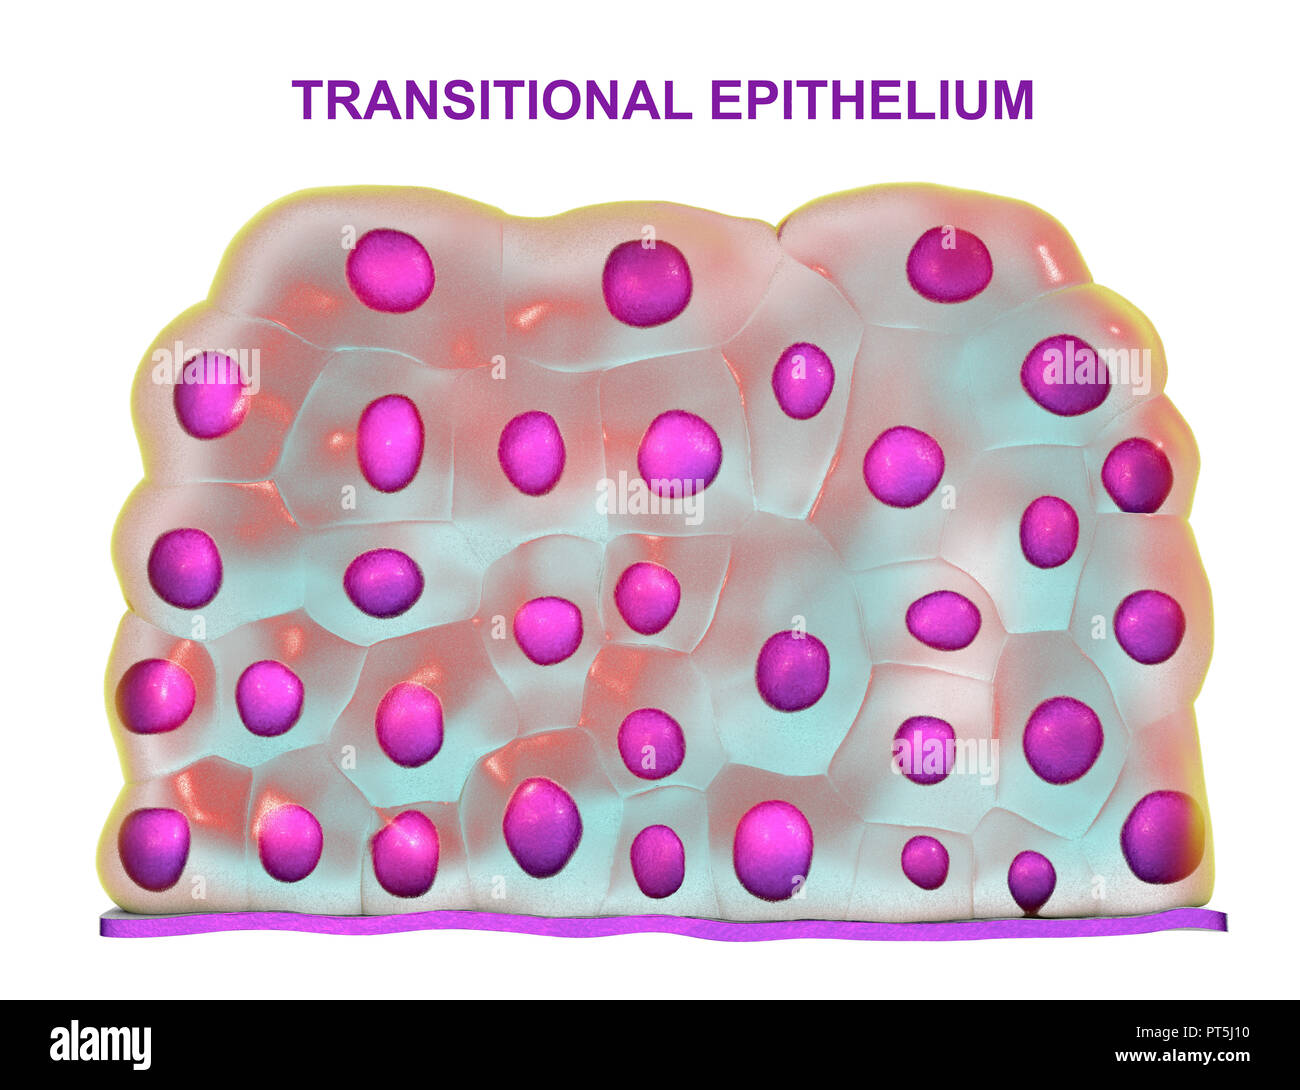 Transitional epithelium, computer illustration. This type of epithelium is found in urinary bladder. Stock Photo